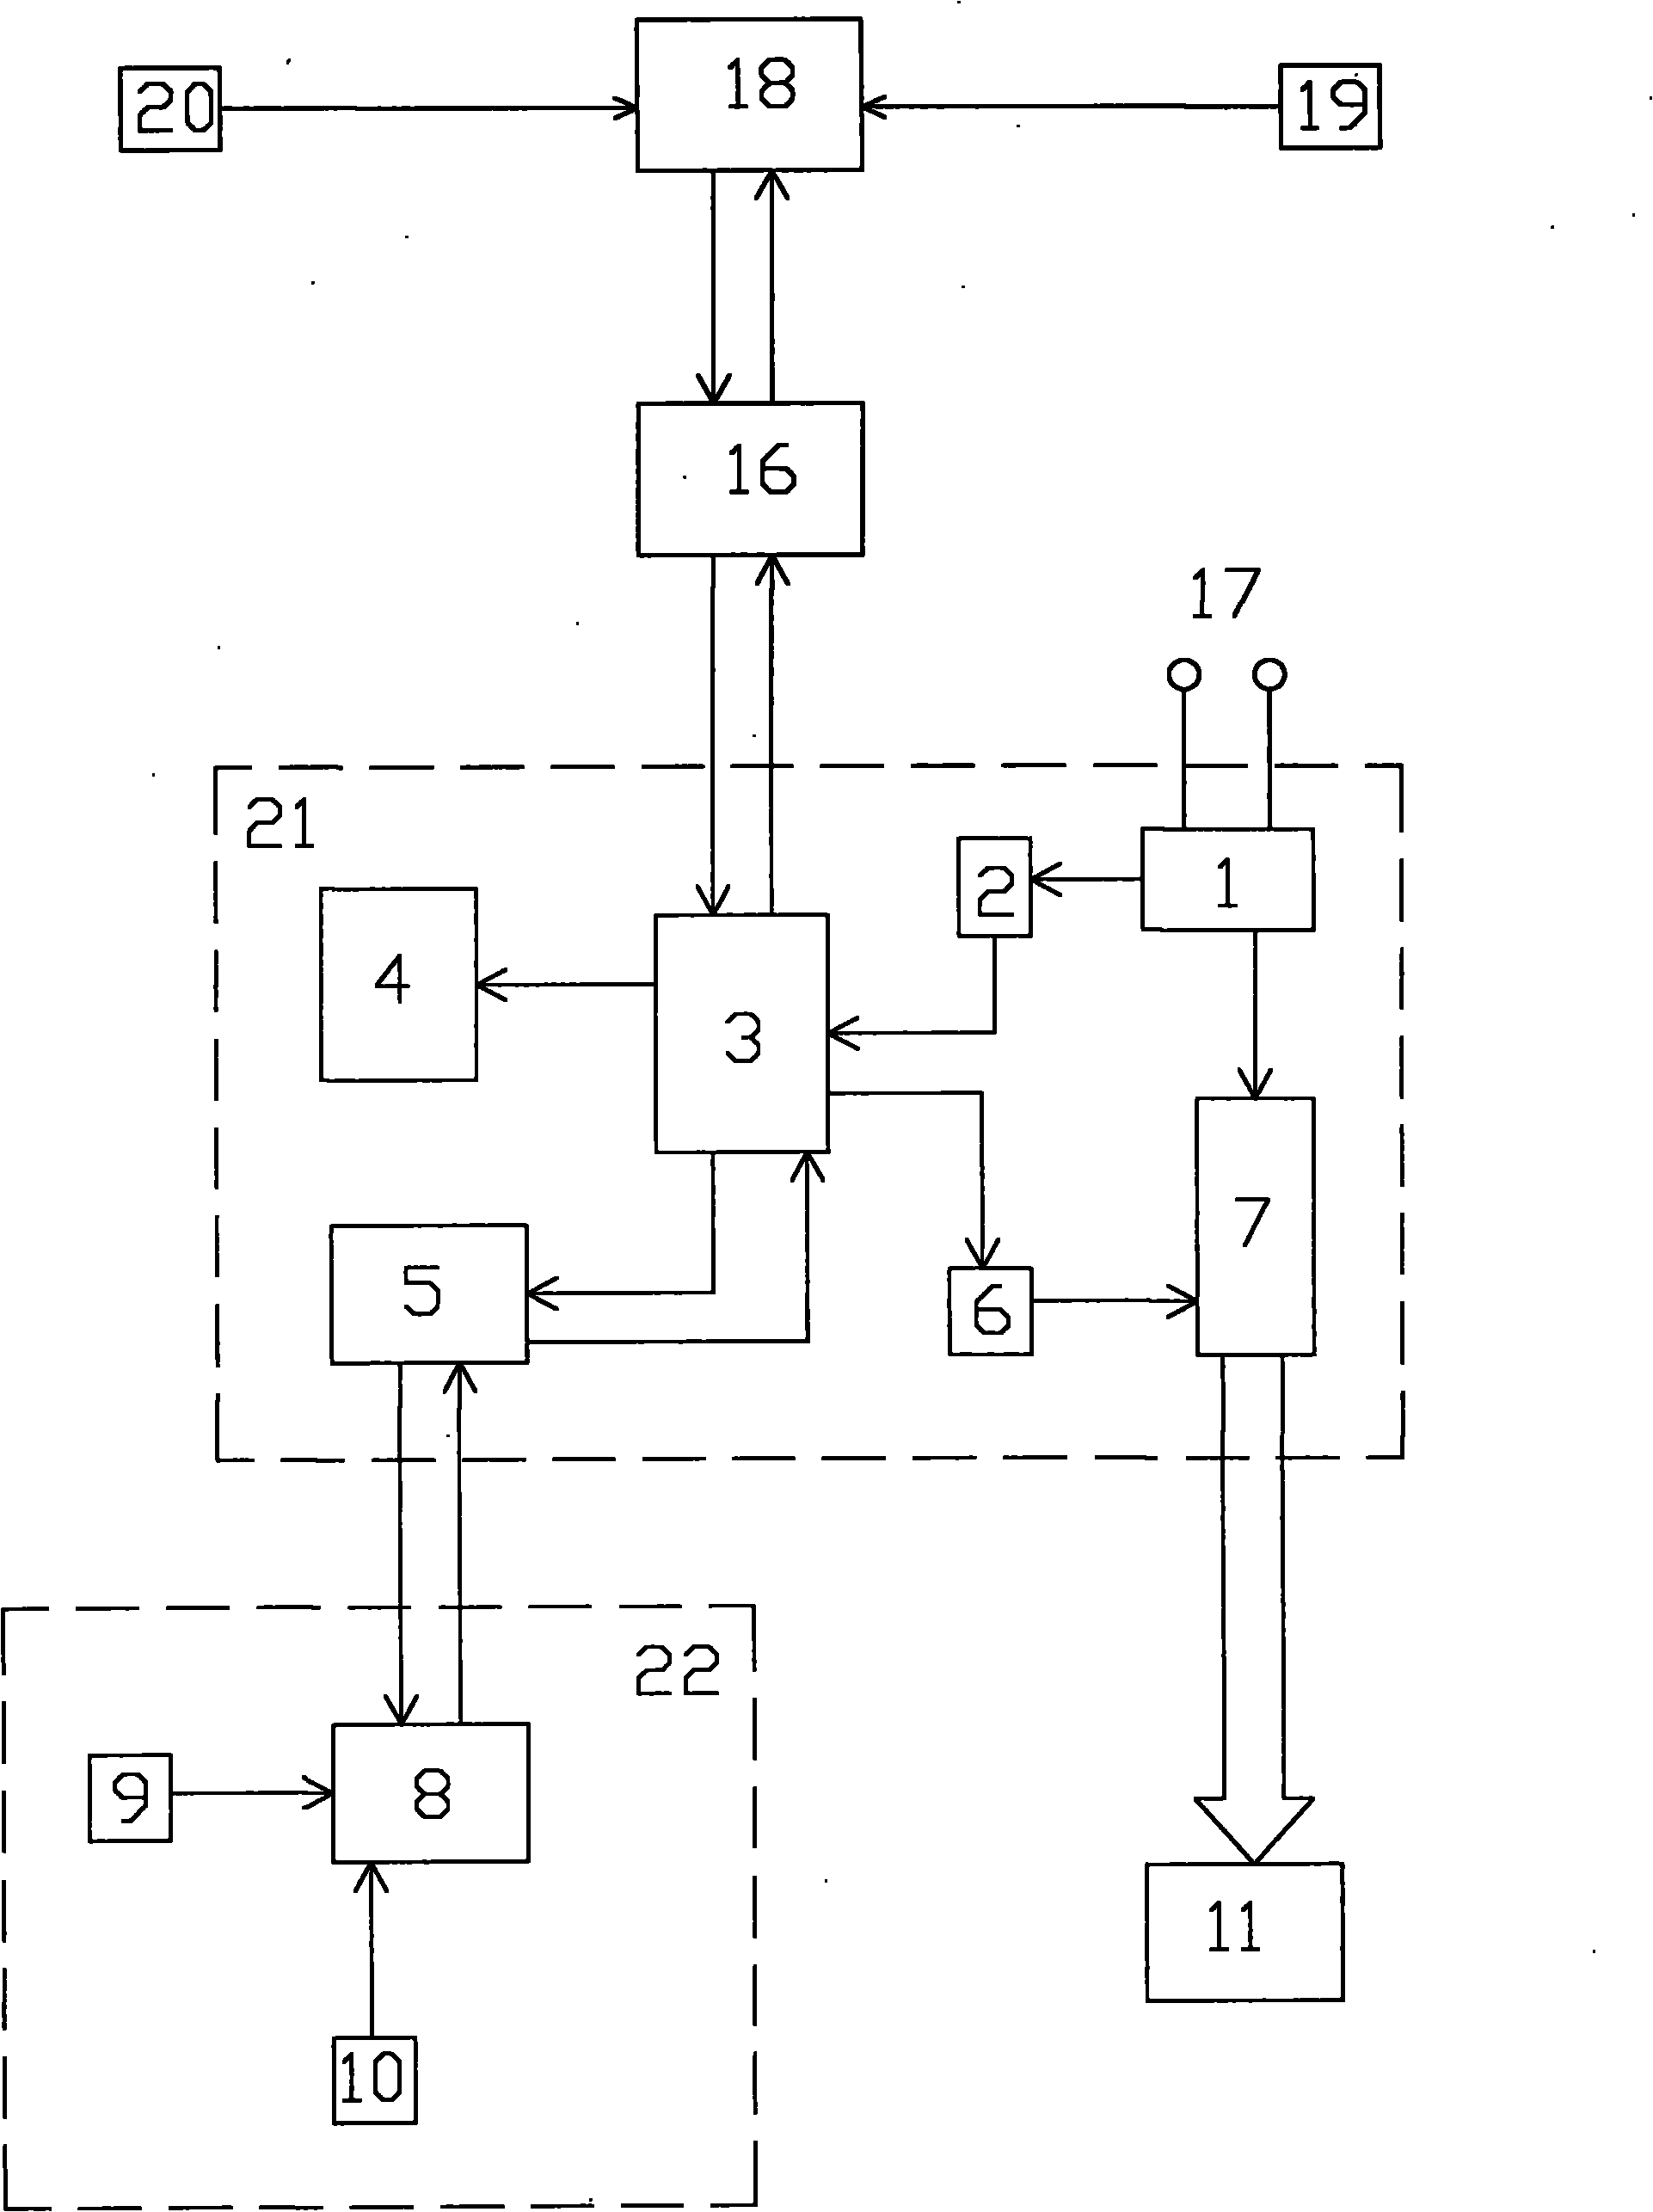 Central heating and household control device for electric ground heating